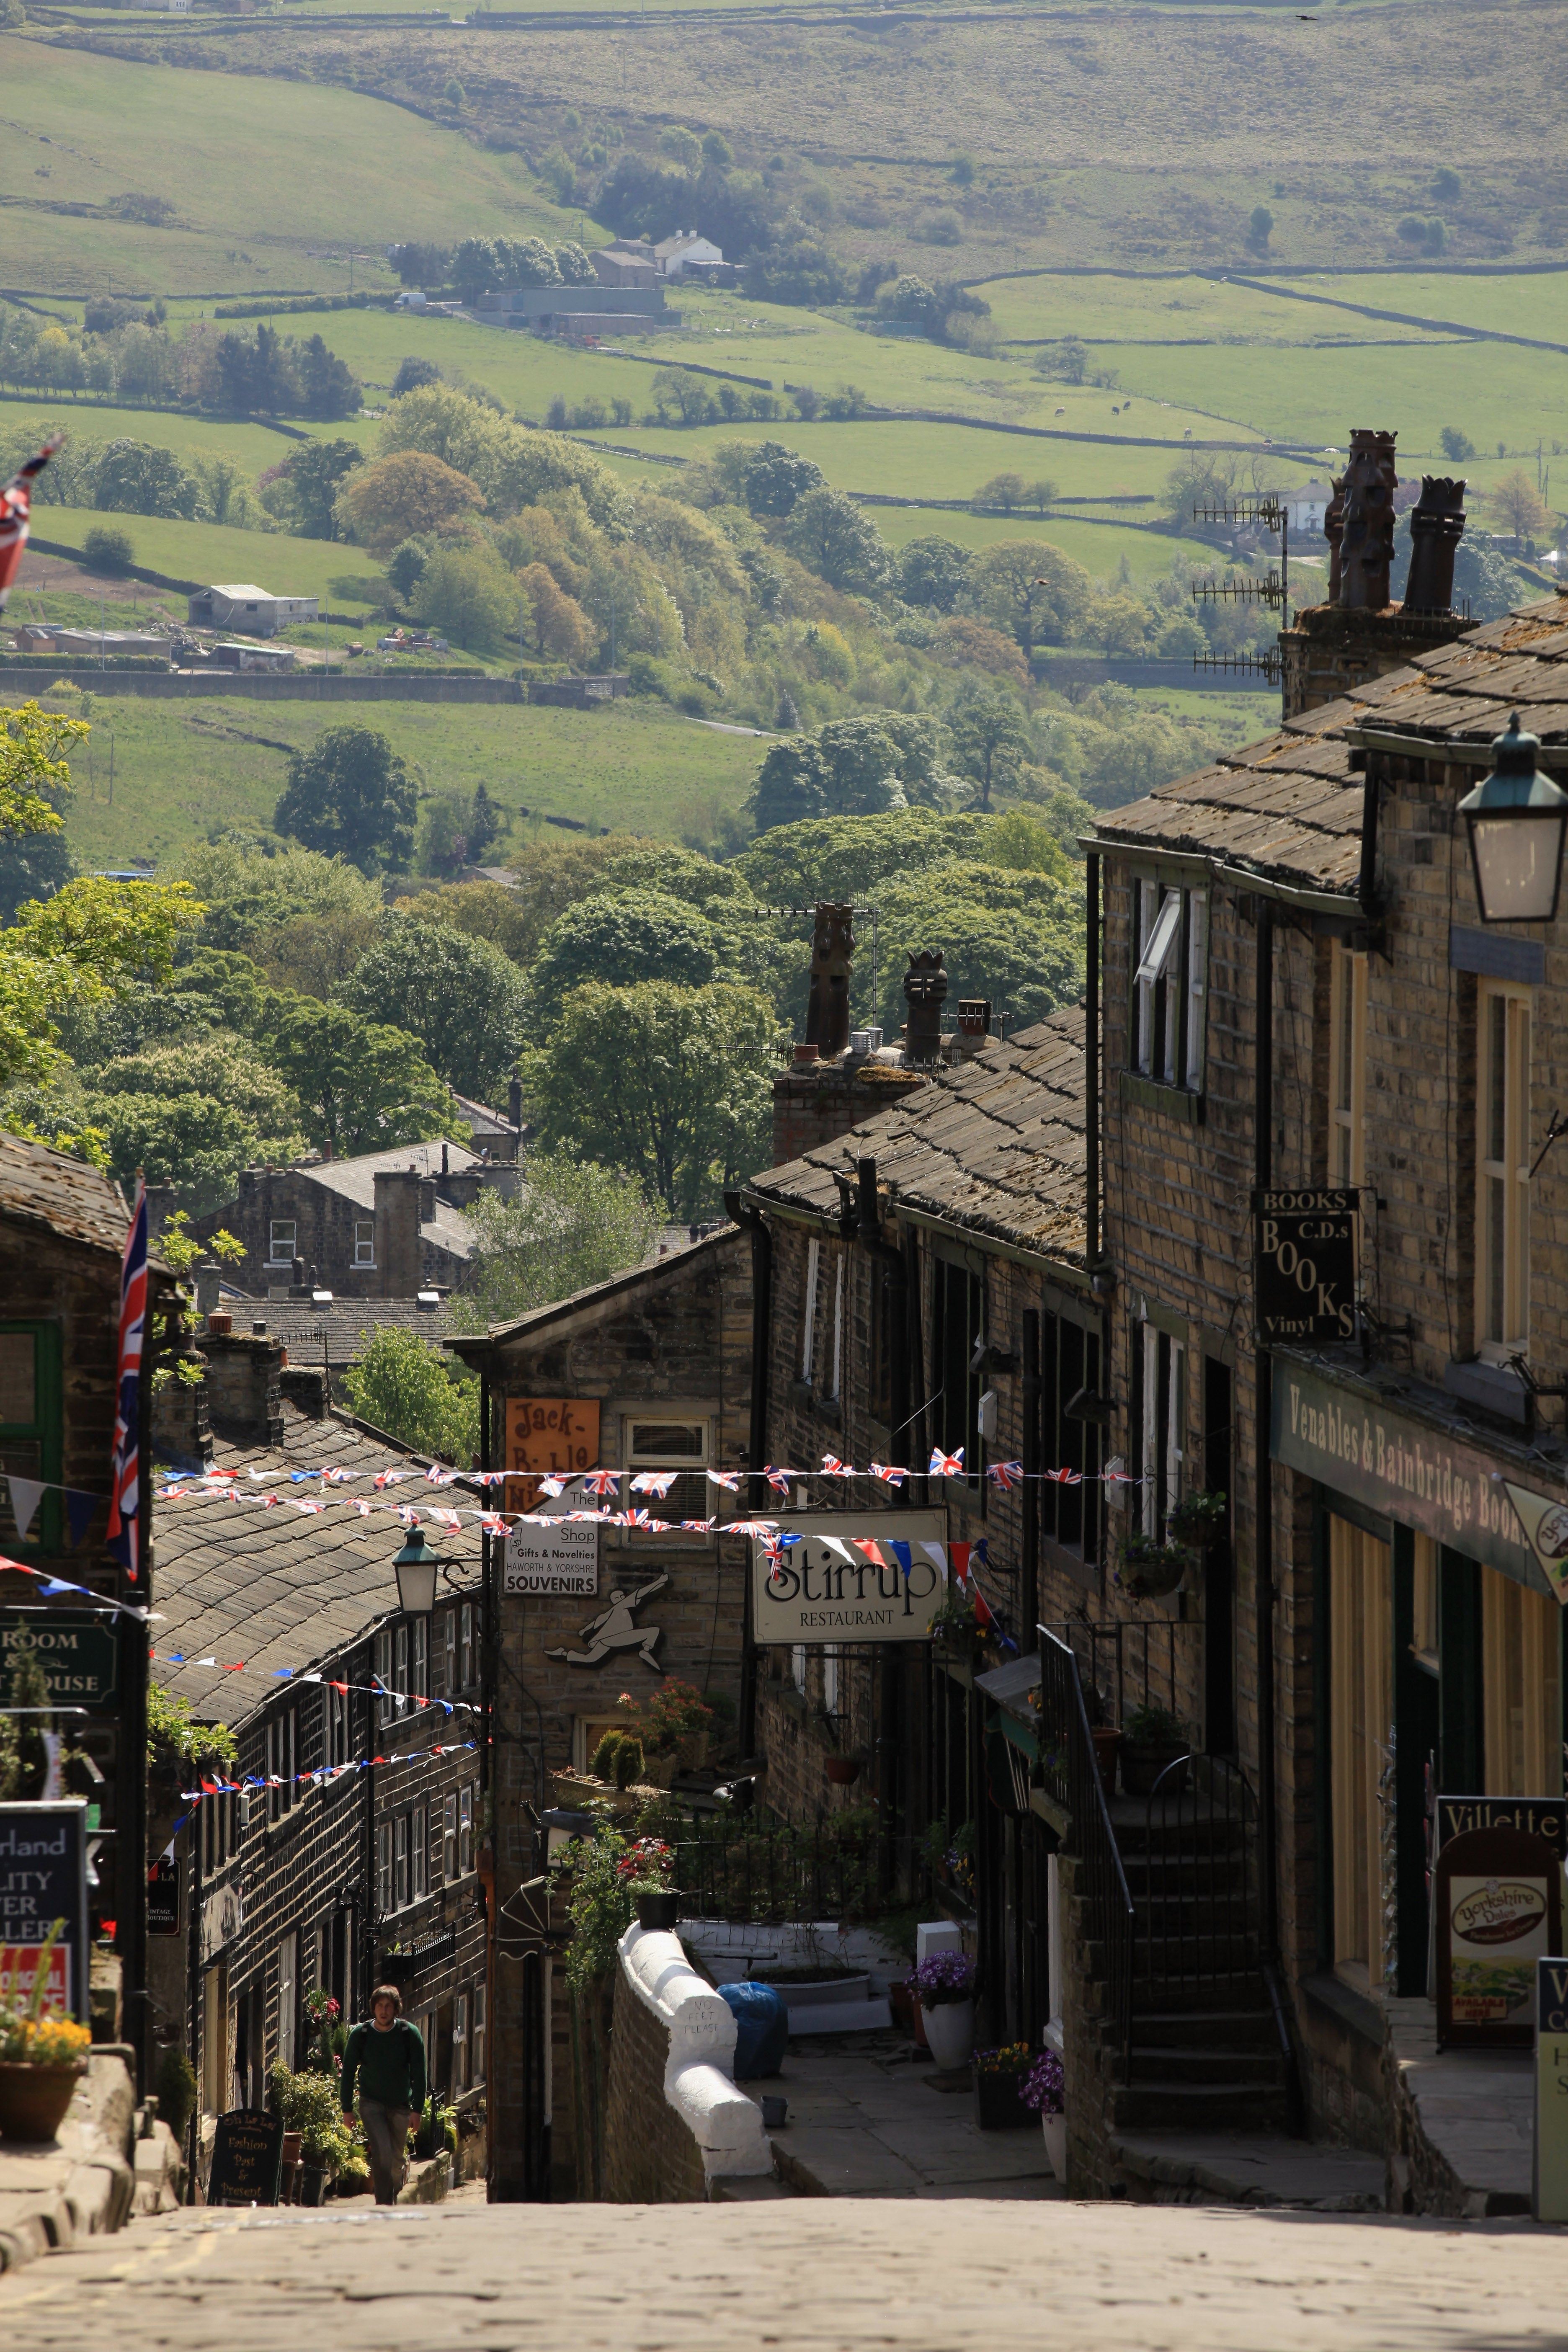 Today the Bront?s’ hometown of Haworth is gorgeous, but it wasn’t always like that